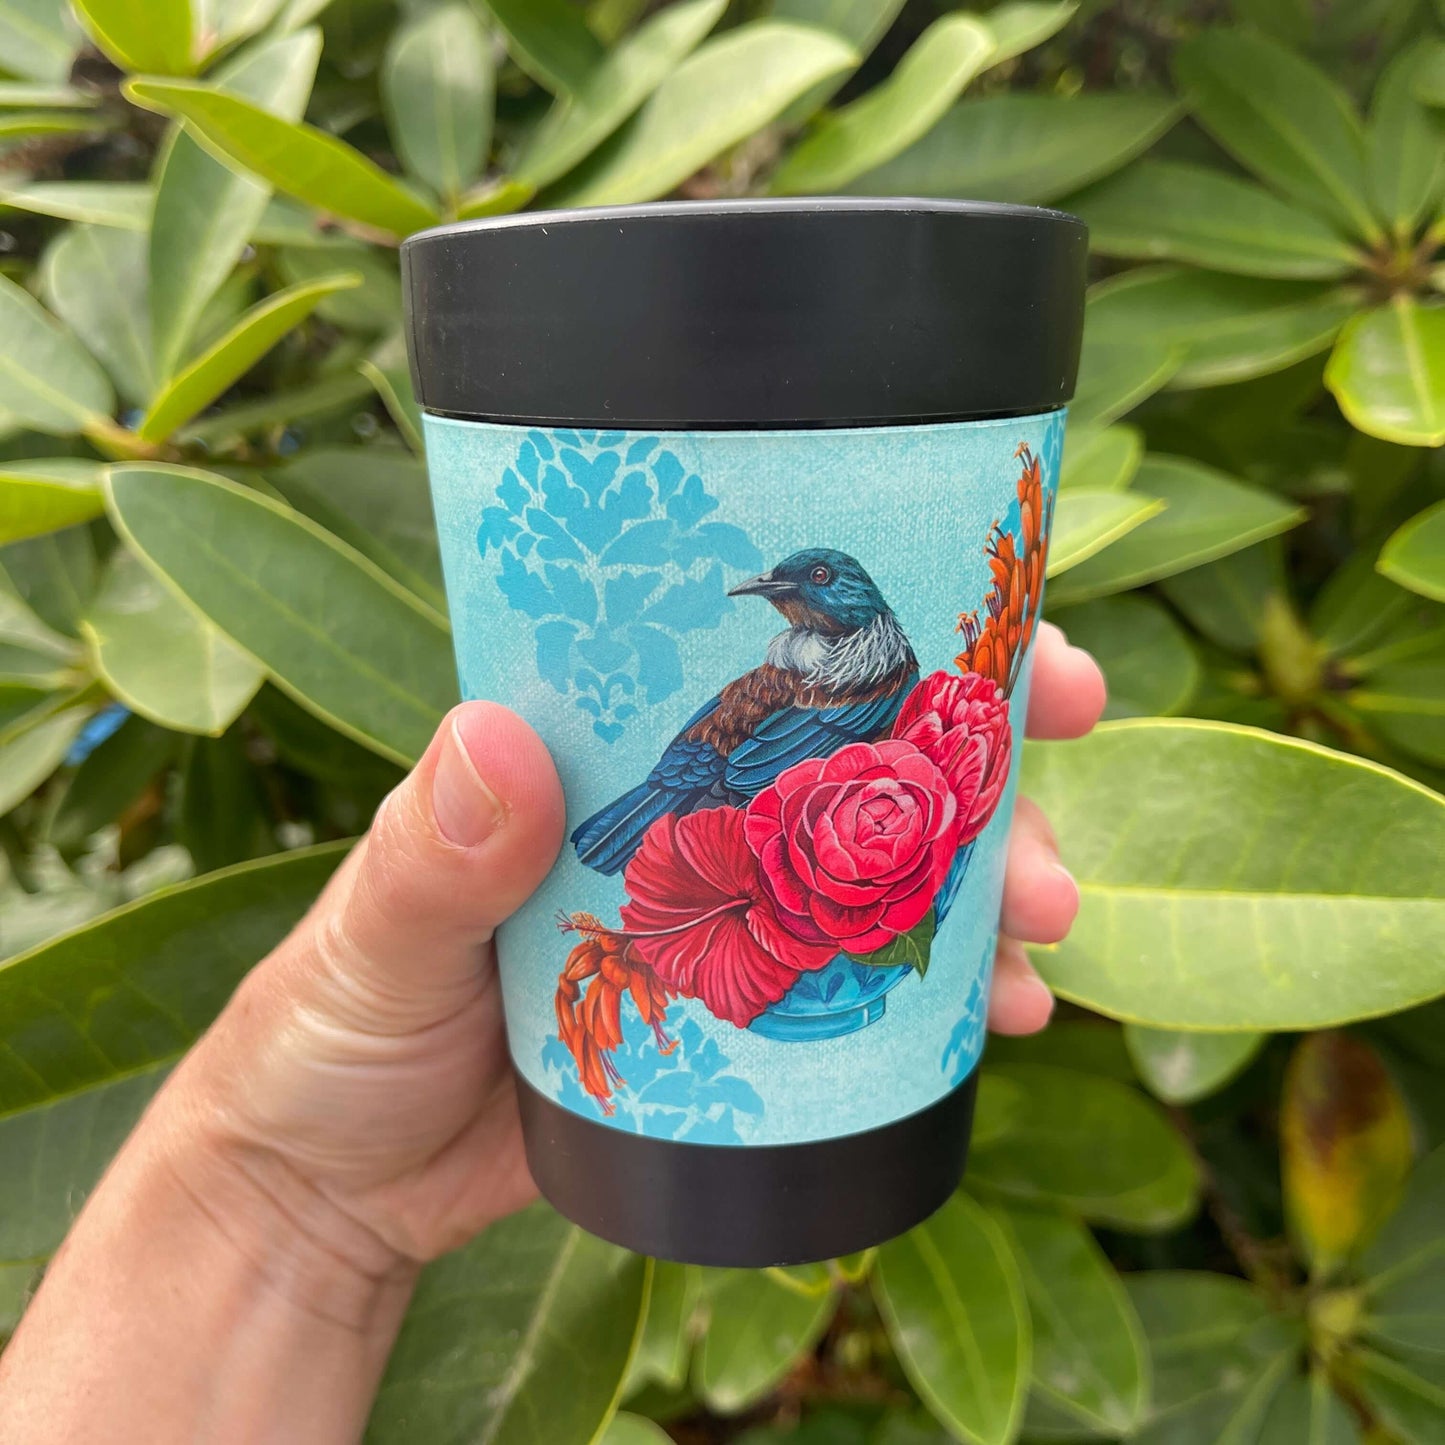 Black reusable coffee cup with light blue patterned wrap featuring a Tūī bird on a branch of pink and orange flowers.